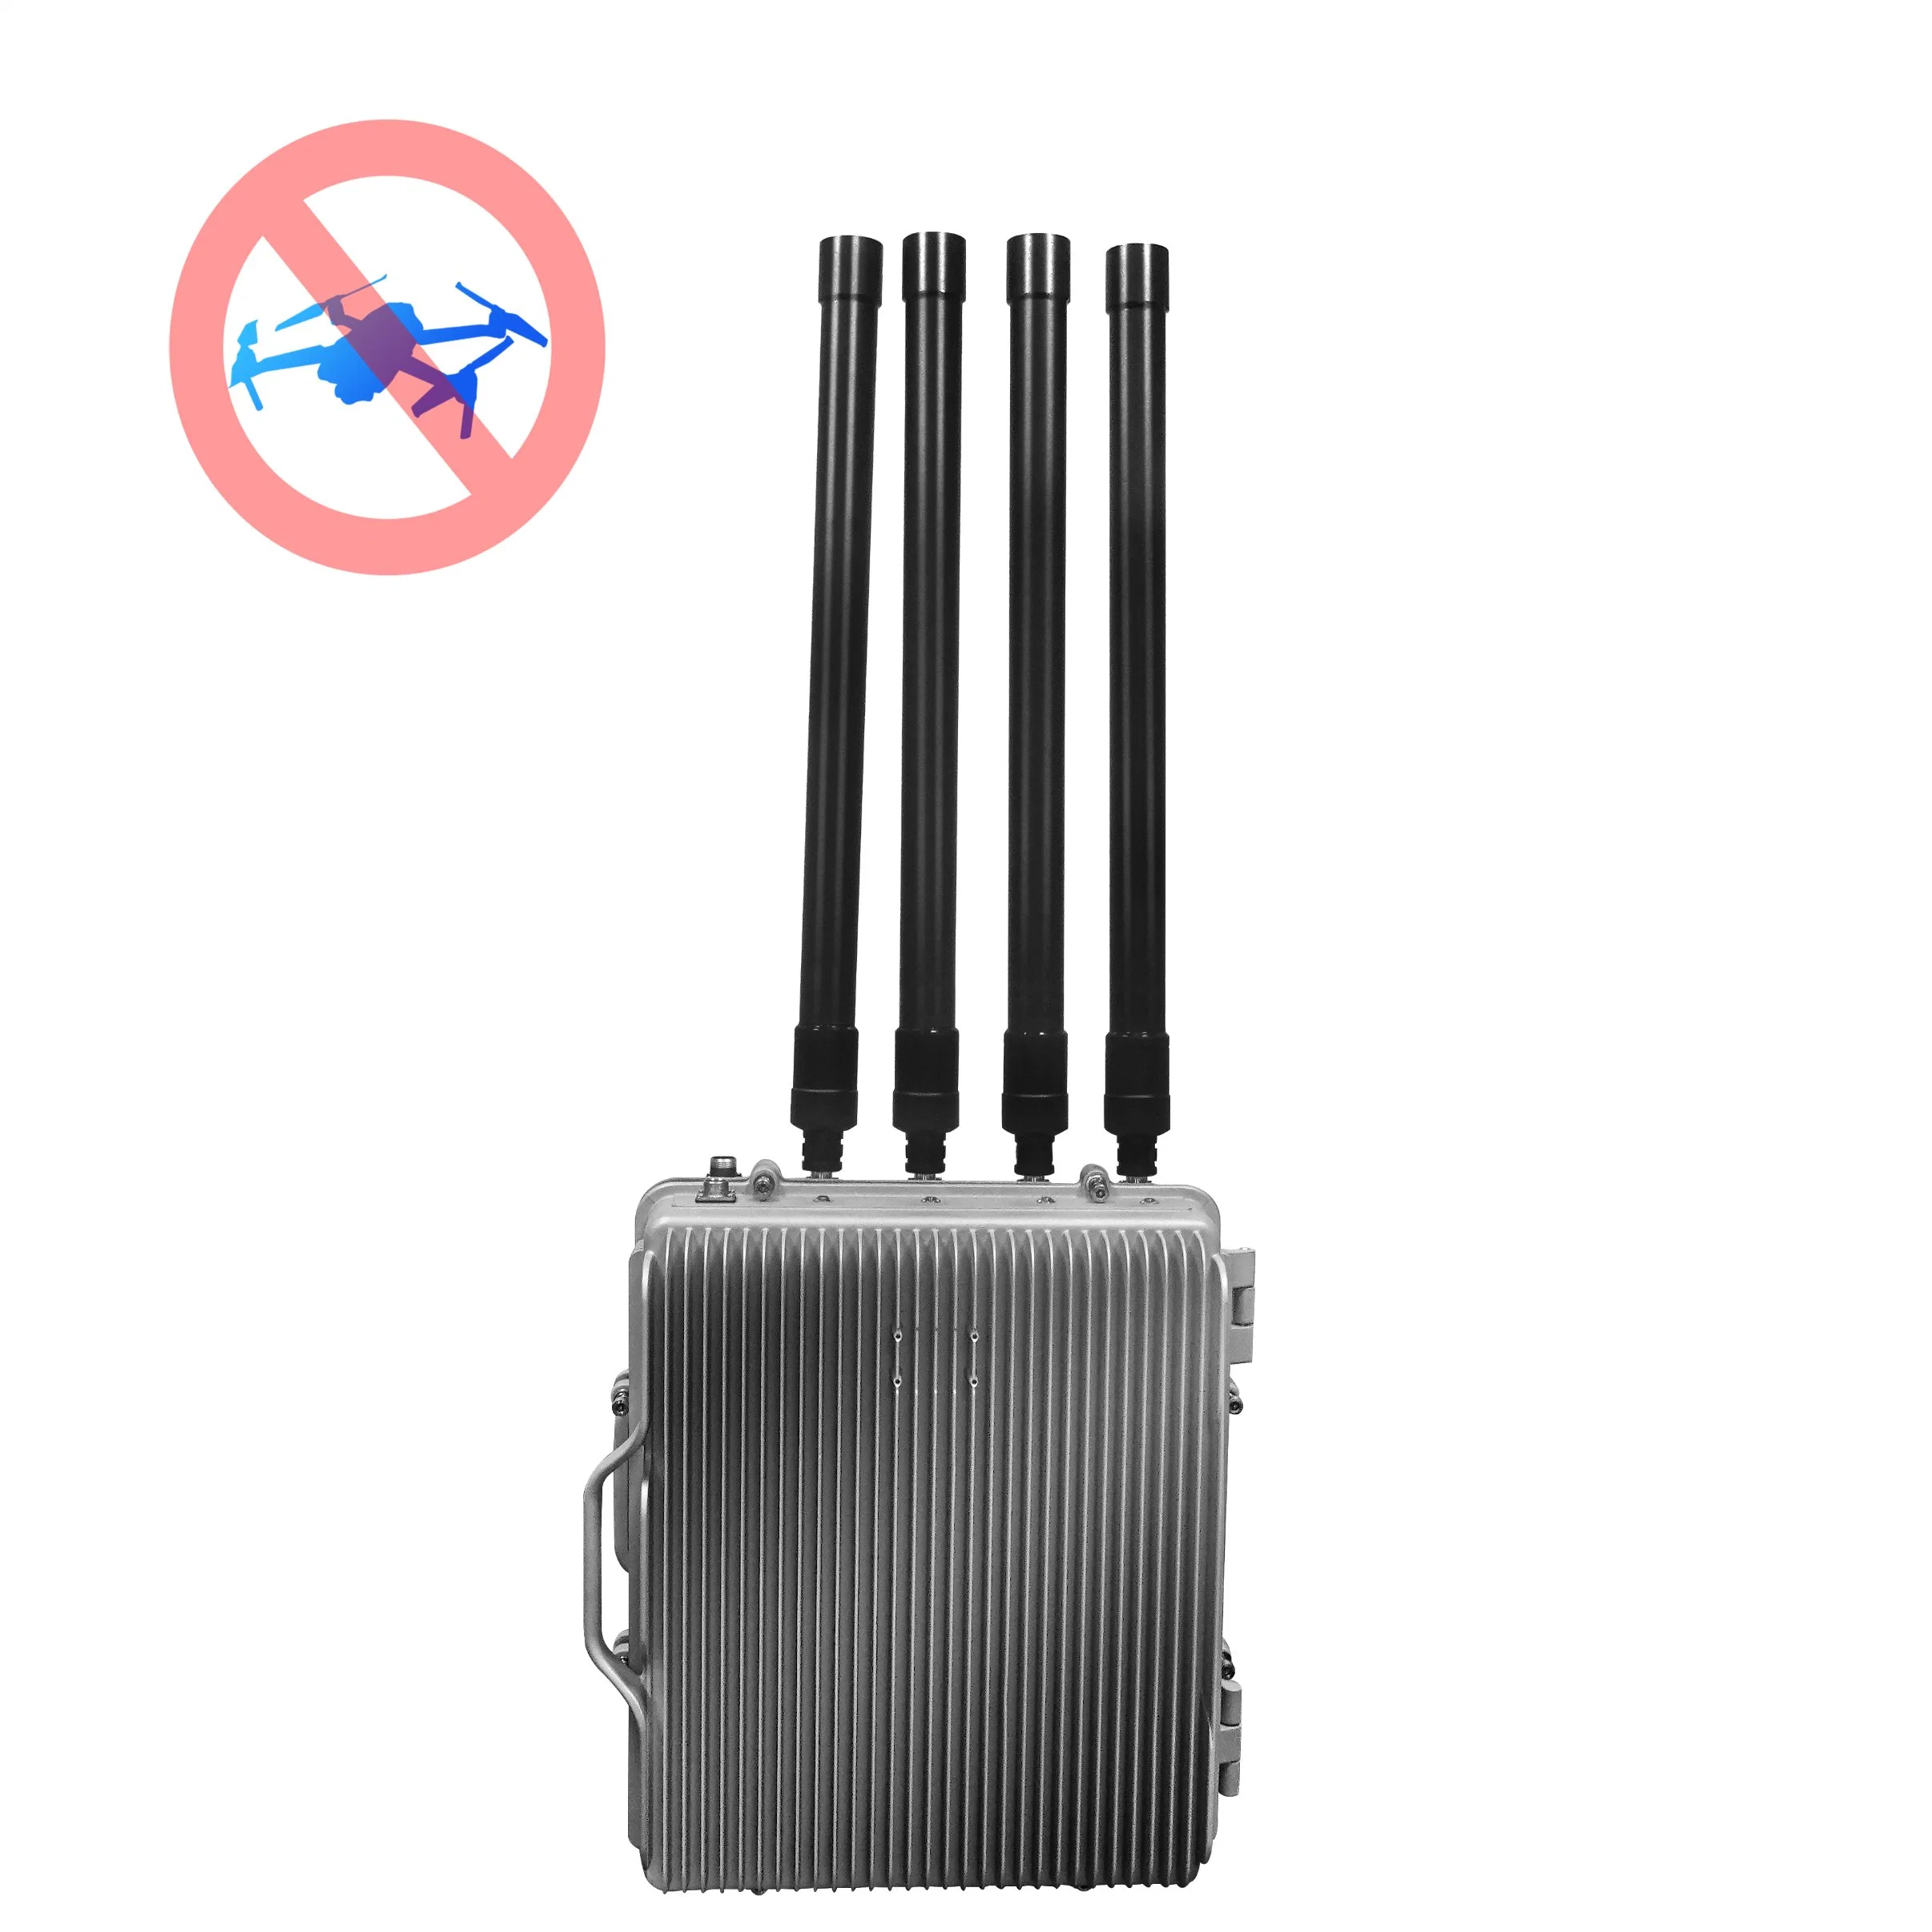 Outdoor Waterproof Jammer Anti Drone Jammer System for 24 Hour 7 Day